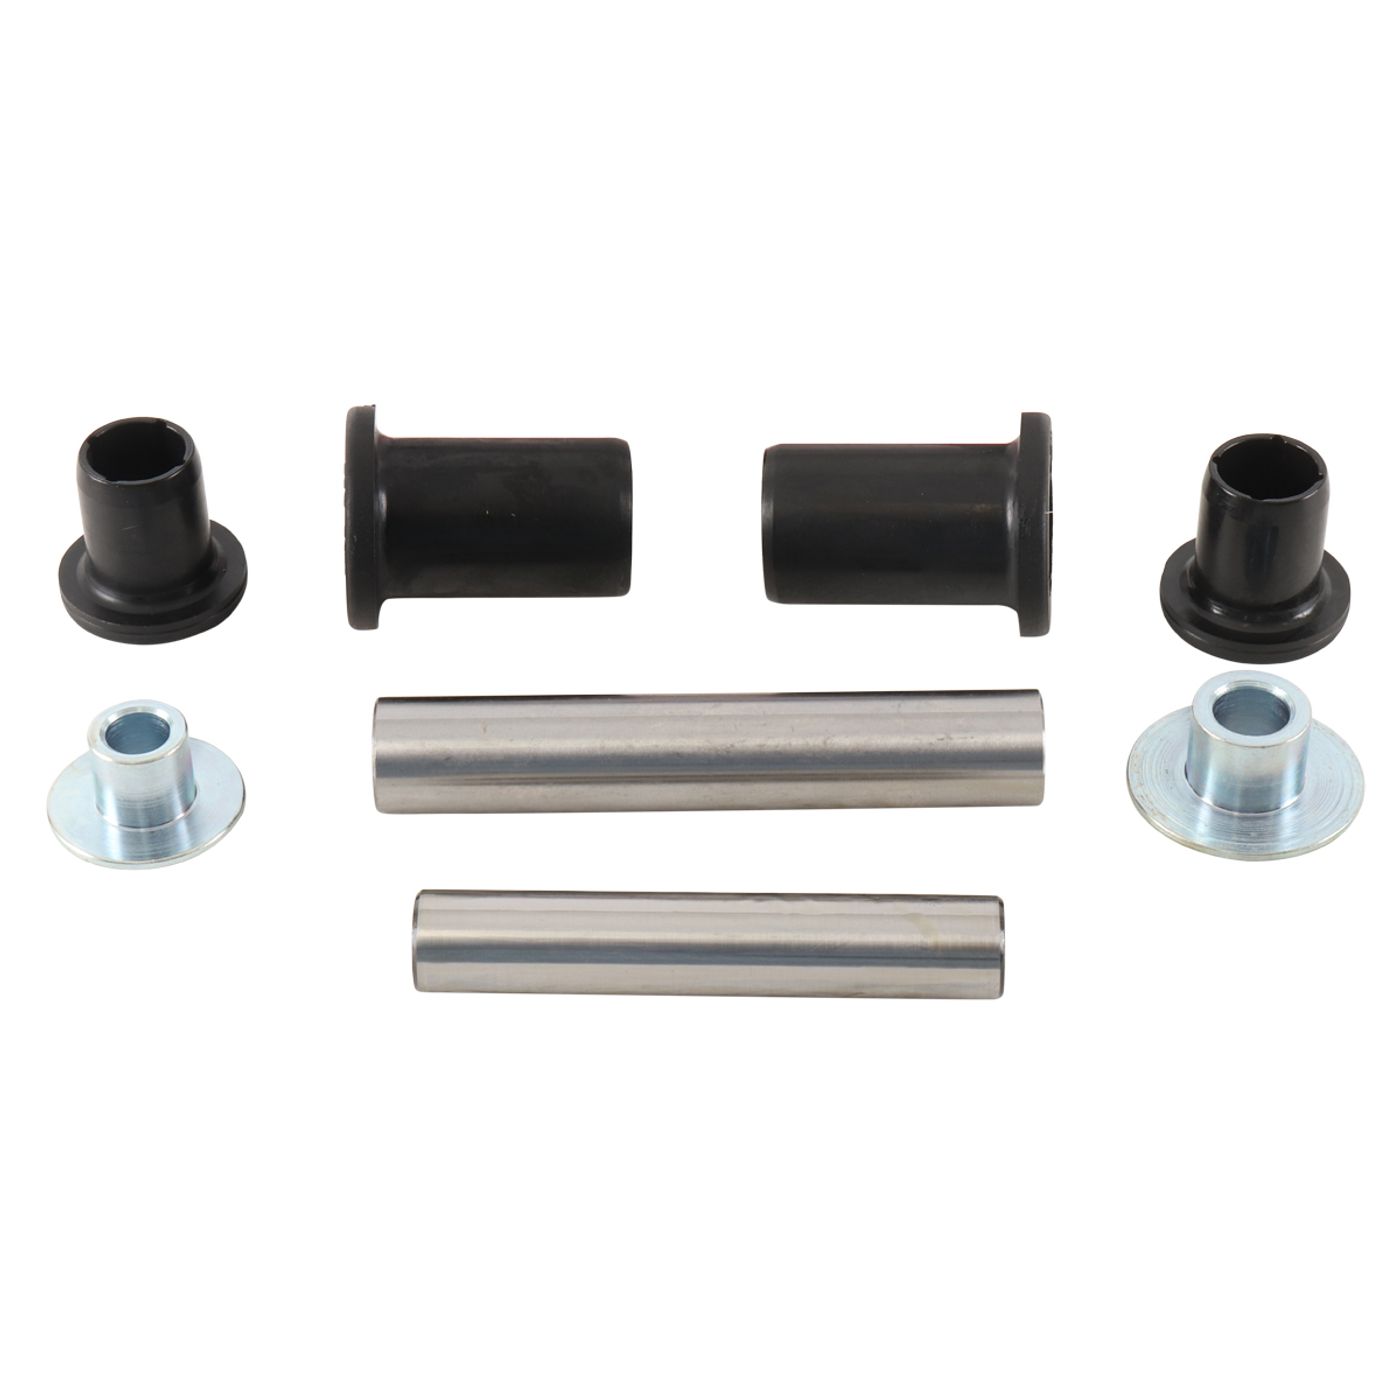 Wrp Rear Ind. Suspension Kits - WRP501221 image